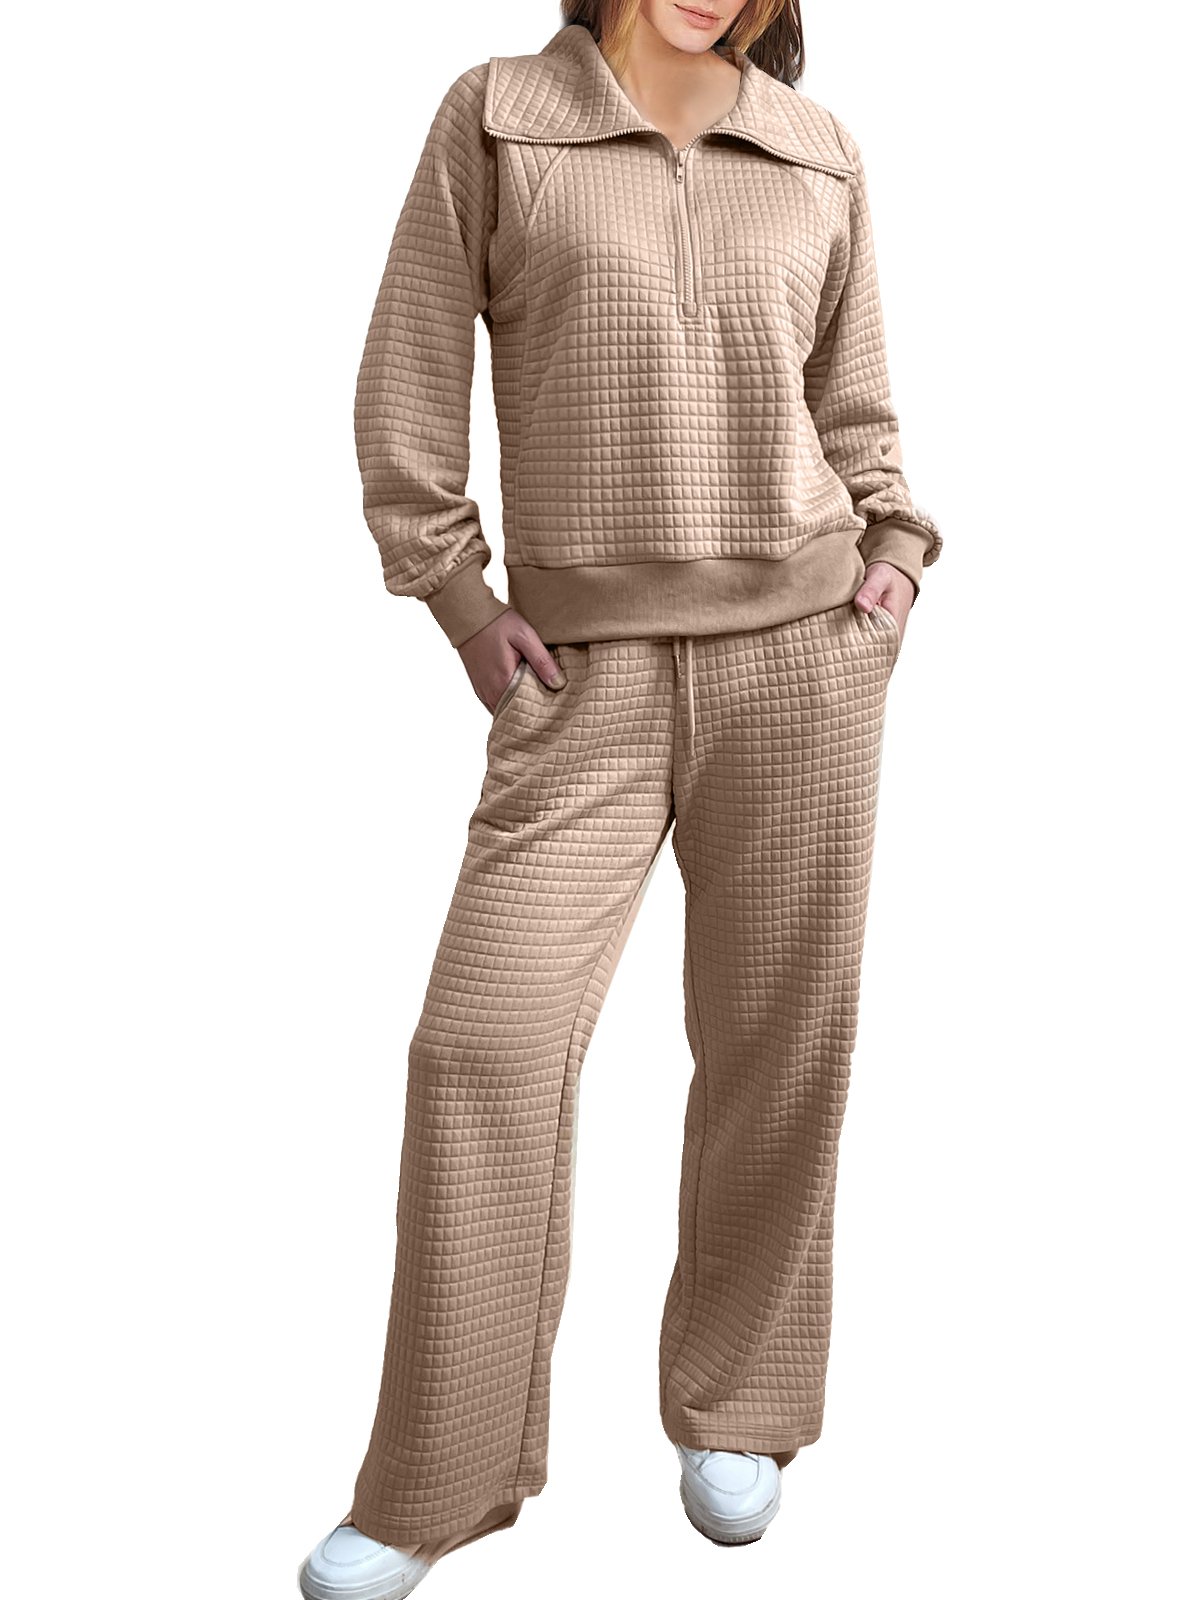 Women's Plain Daily Going Out Two-Piece Set Light Khaki Casual Spring/Fall Top With Pants Matching Set